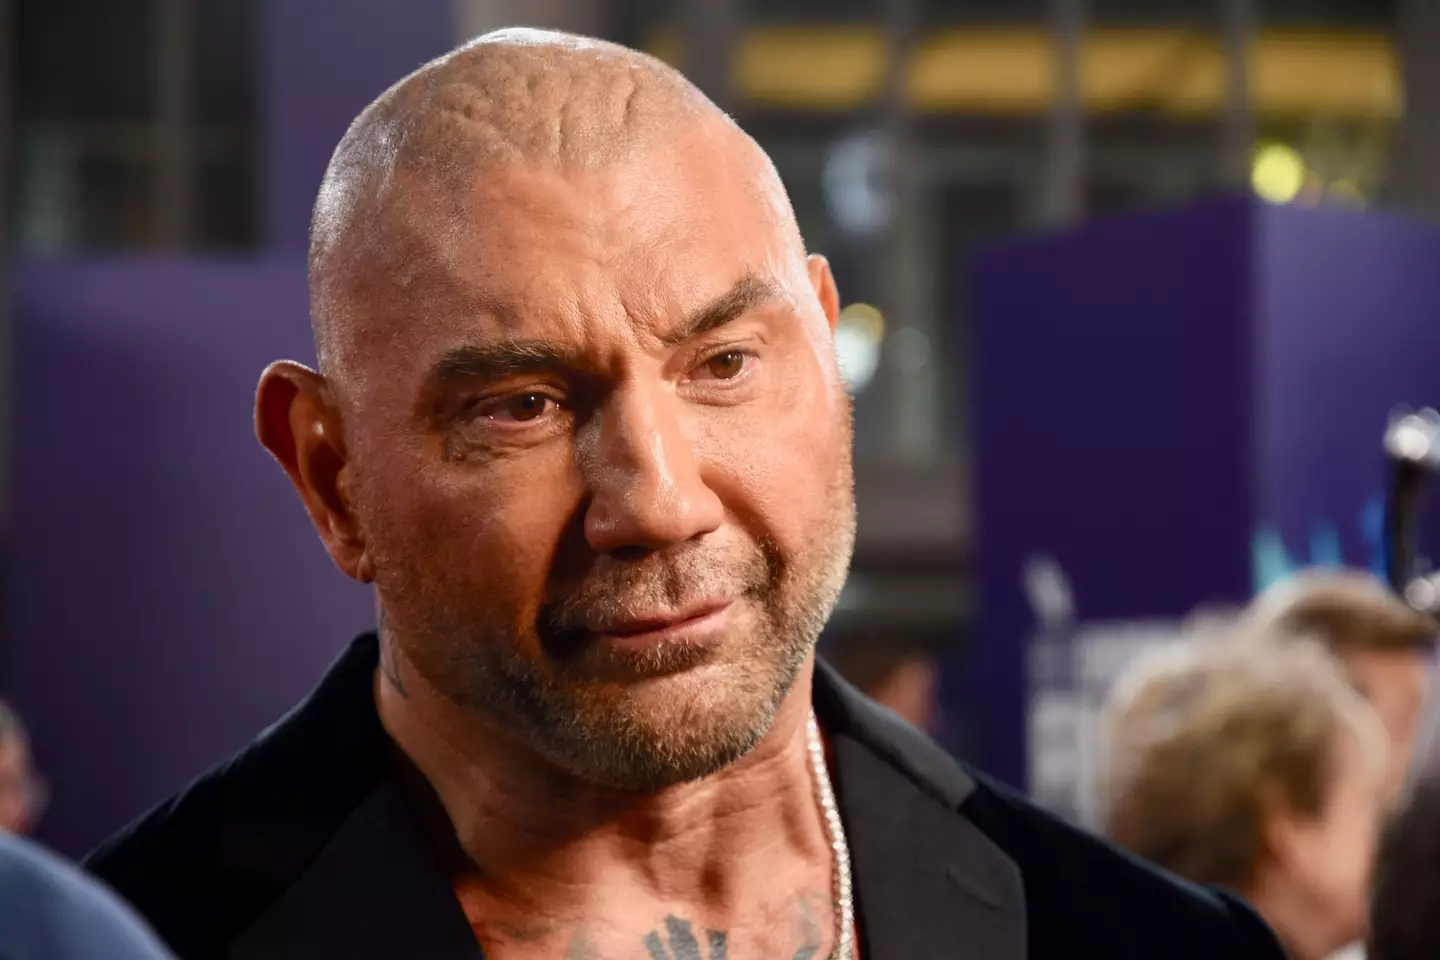 Dave Bautista has attracted a lot of praise since he went from wrestling to acting.